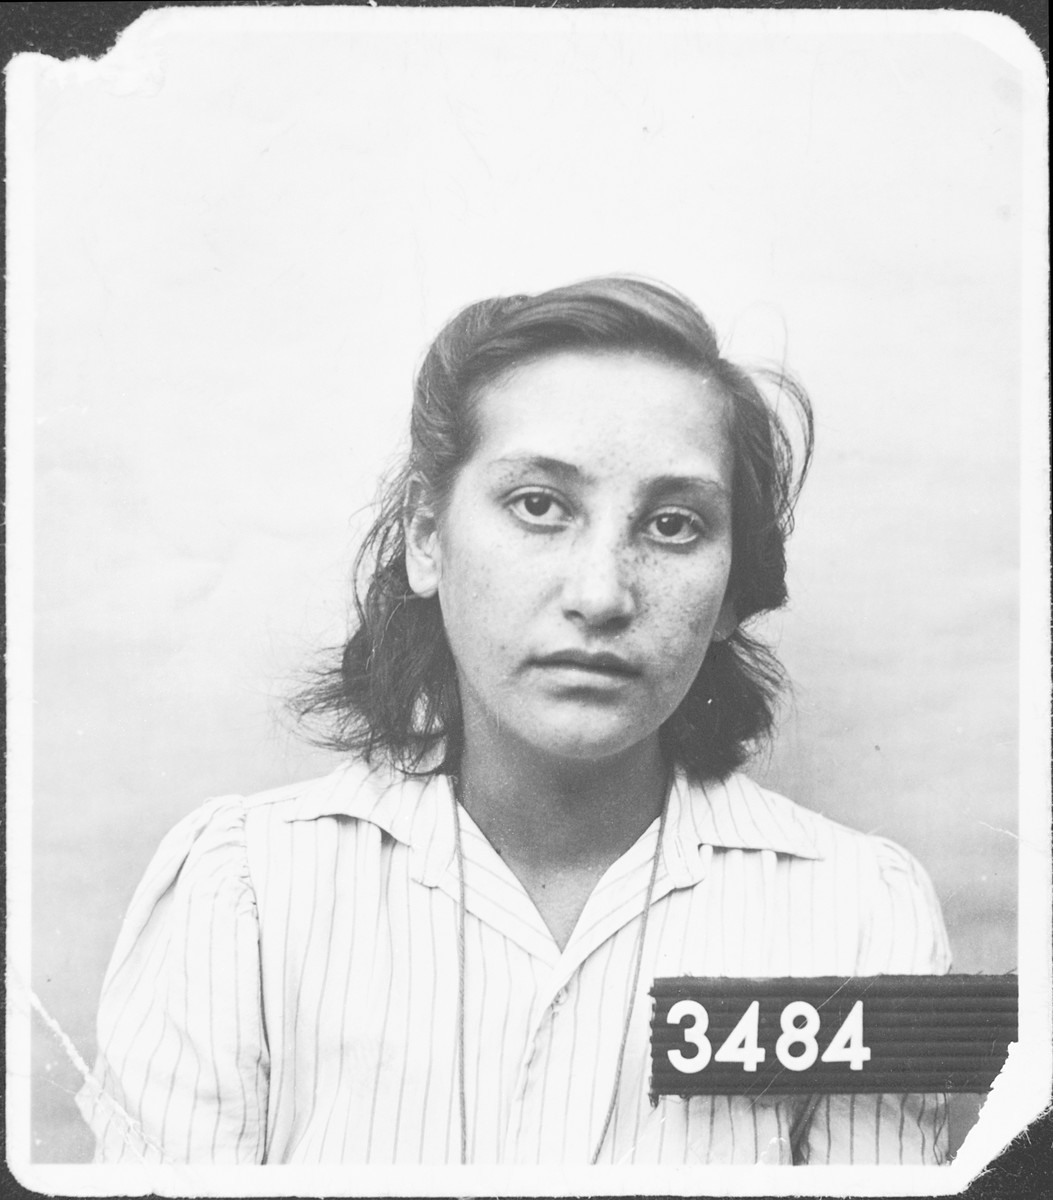 Olga Jakubovits poses for her entry photo as Jewish refugee in Malmo, Sweden.